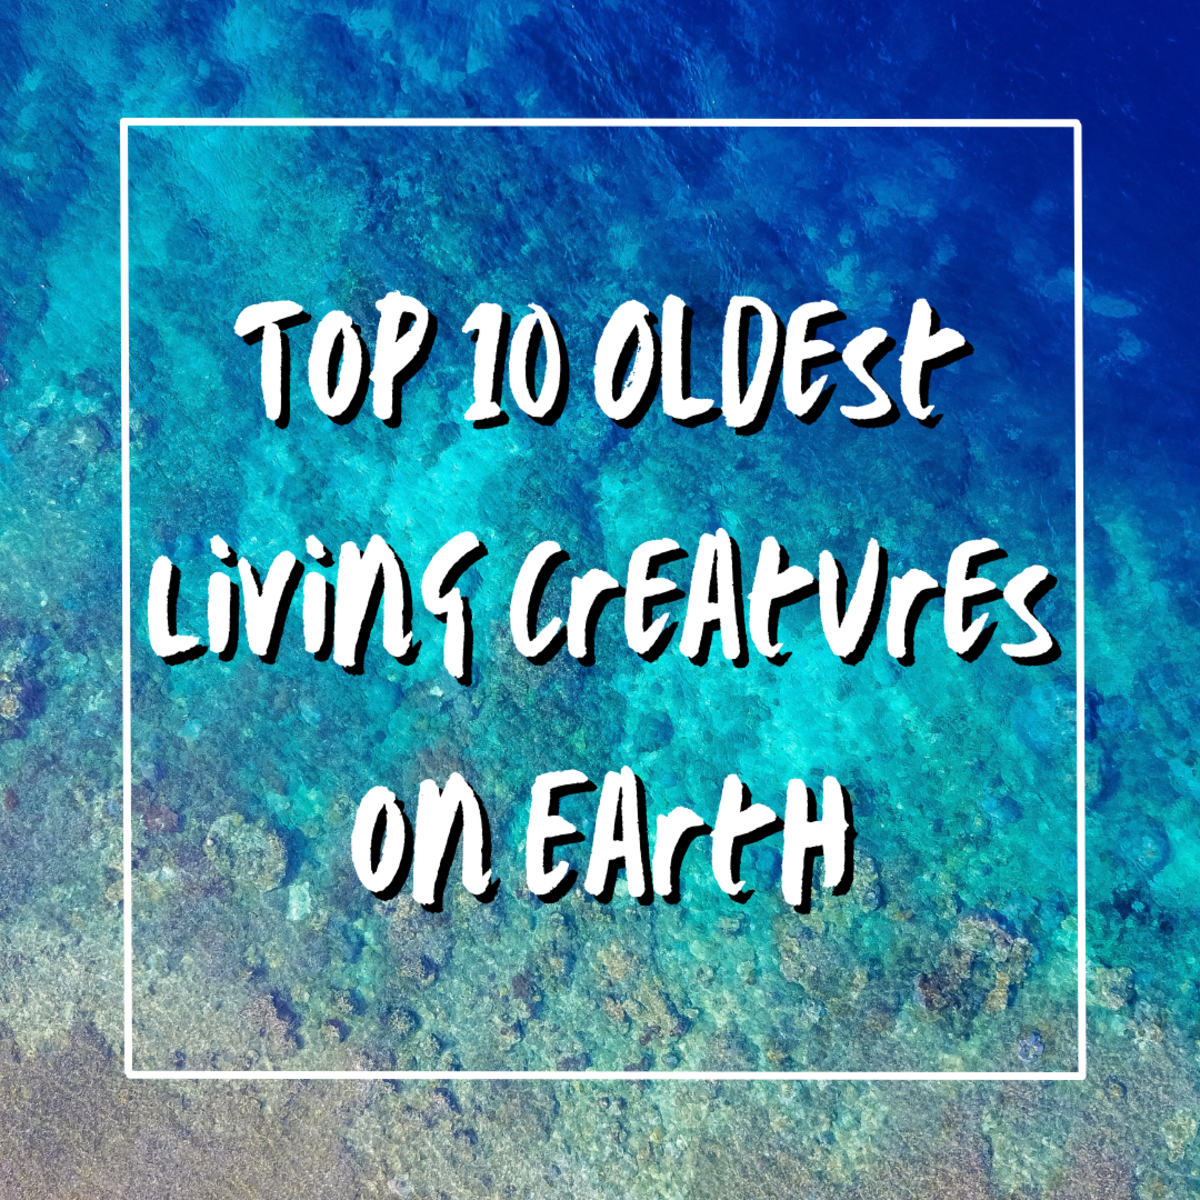 Top 10 Oldest Living Creatures on Earth